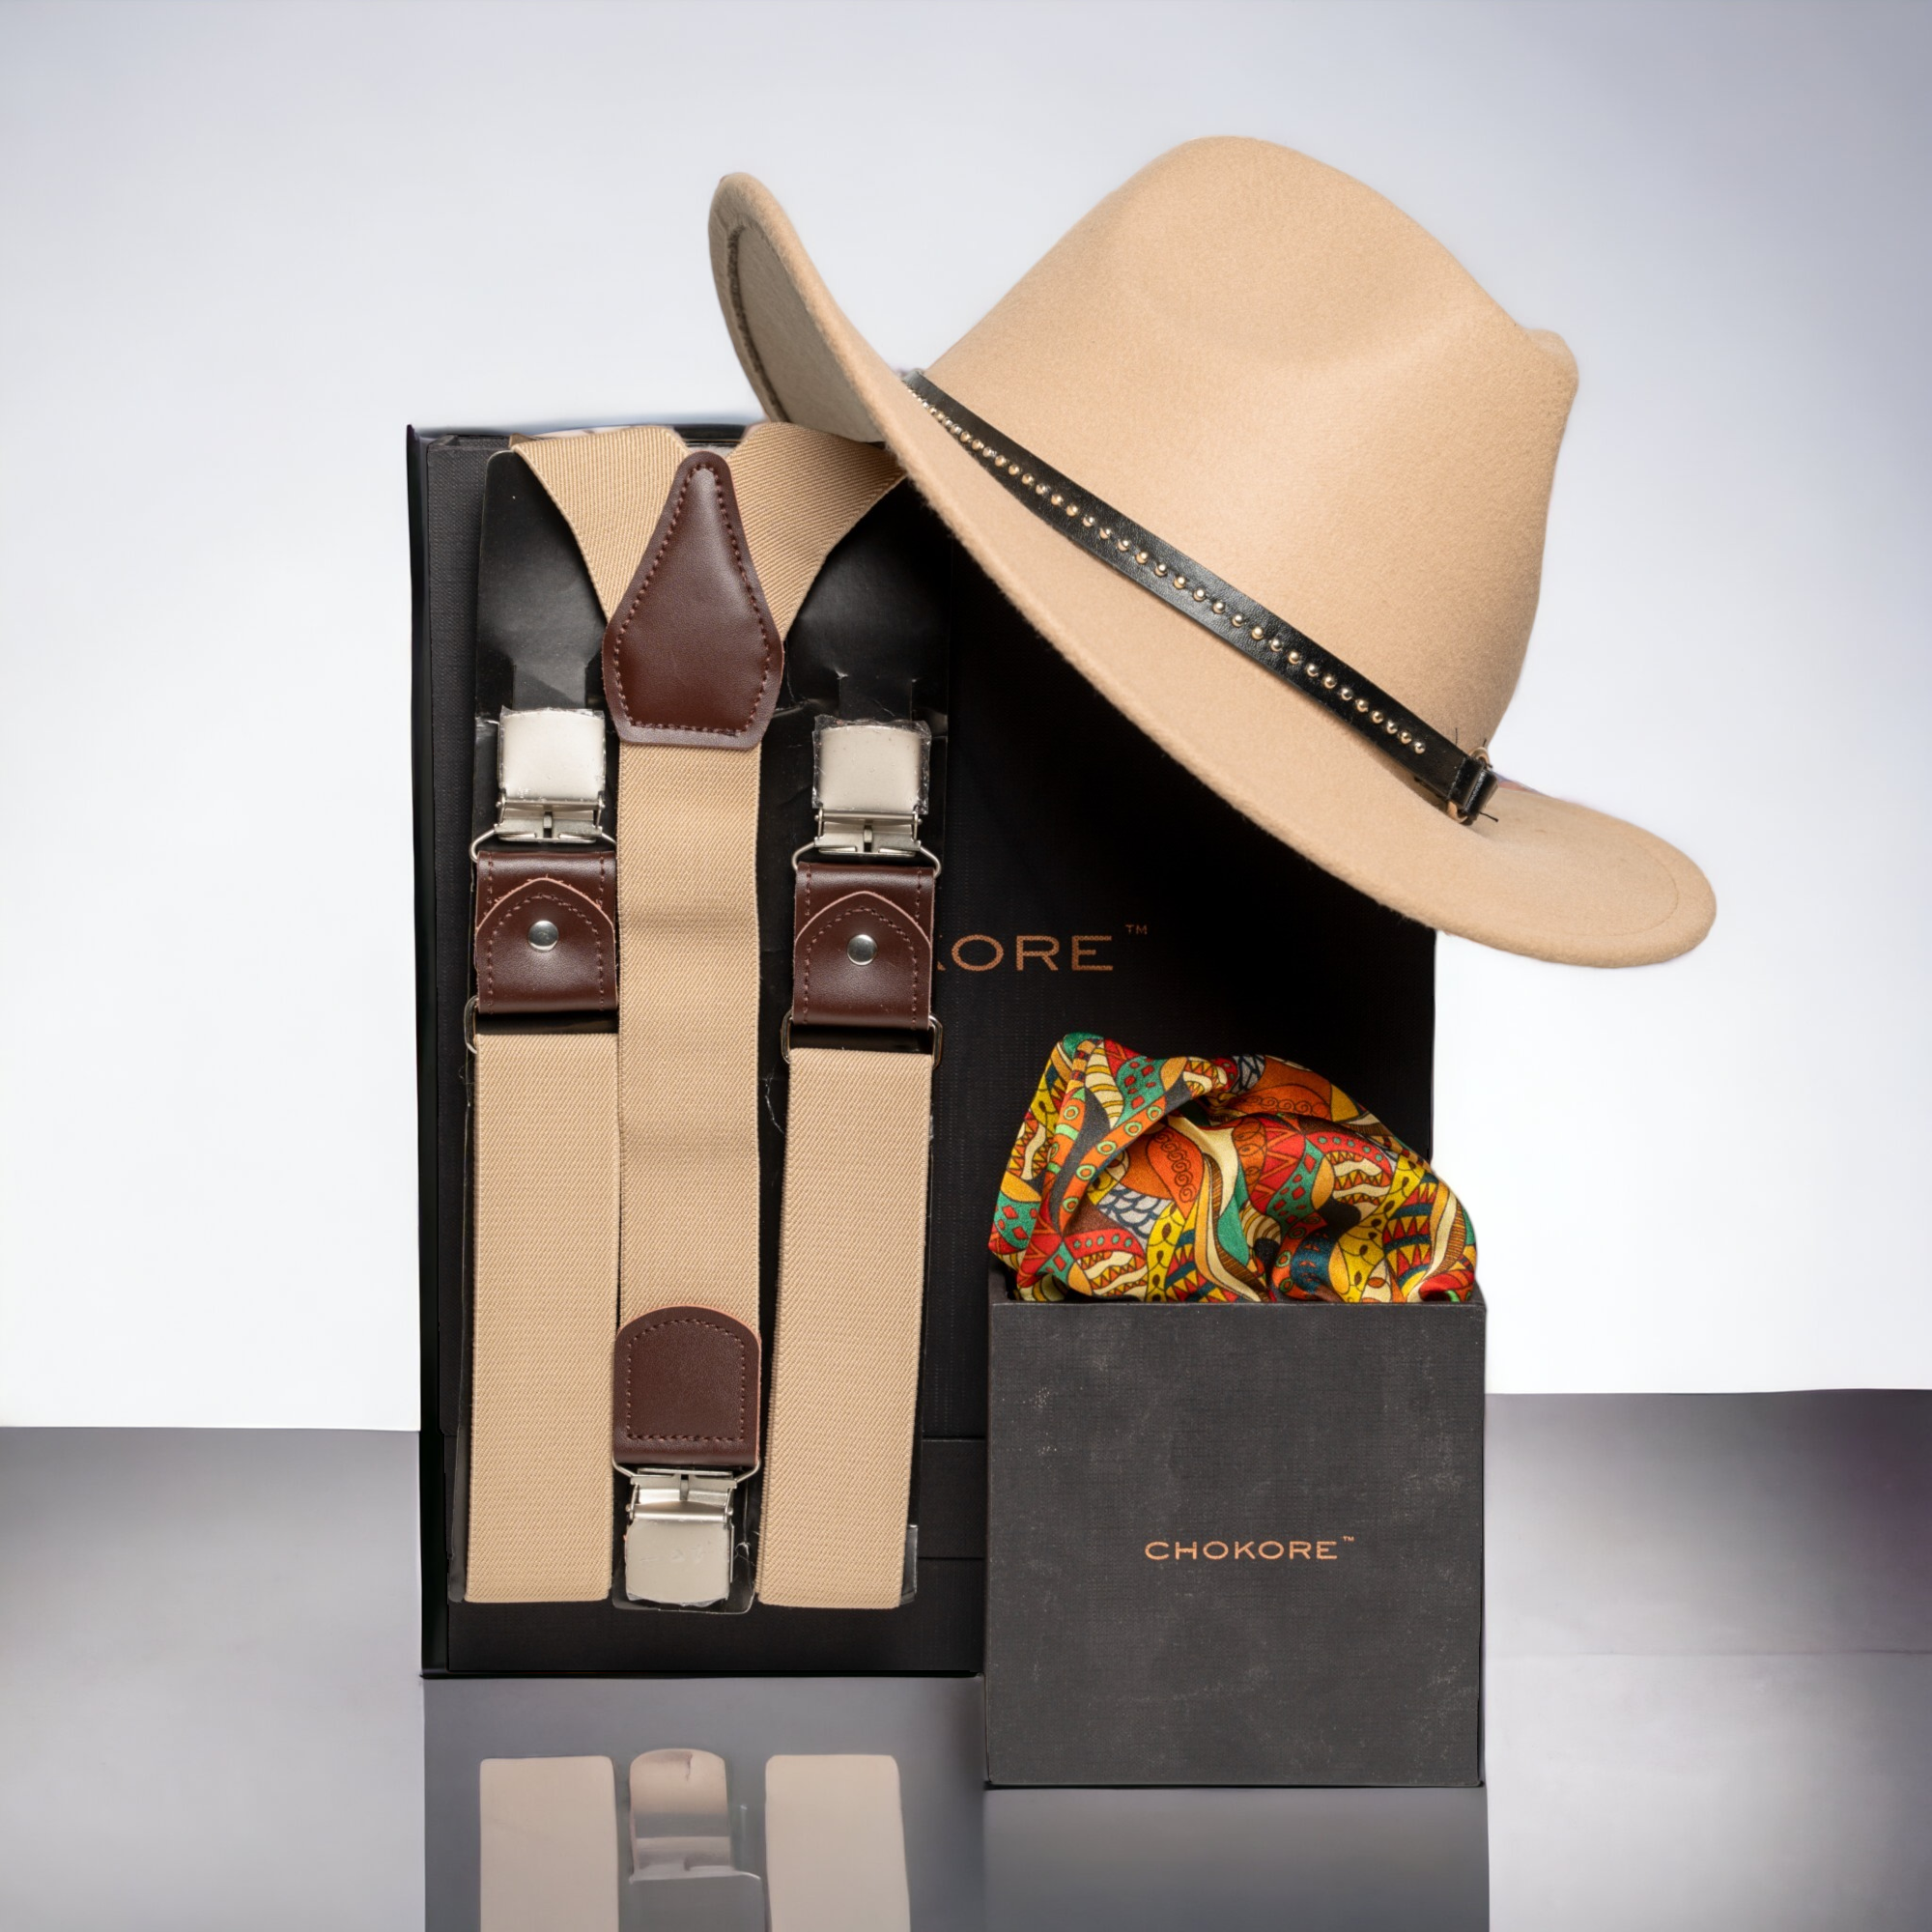 ChokoreSpecial 3-in-1 Gift Set (Hat, Pocket Square, & Suspenders)